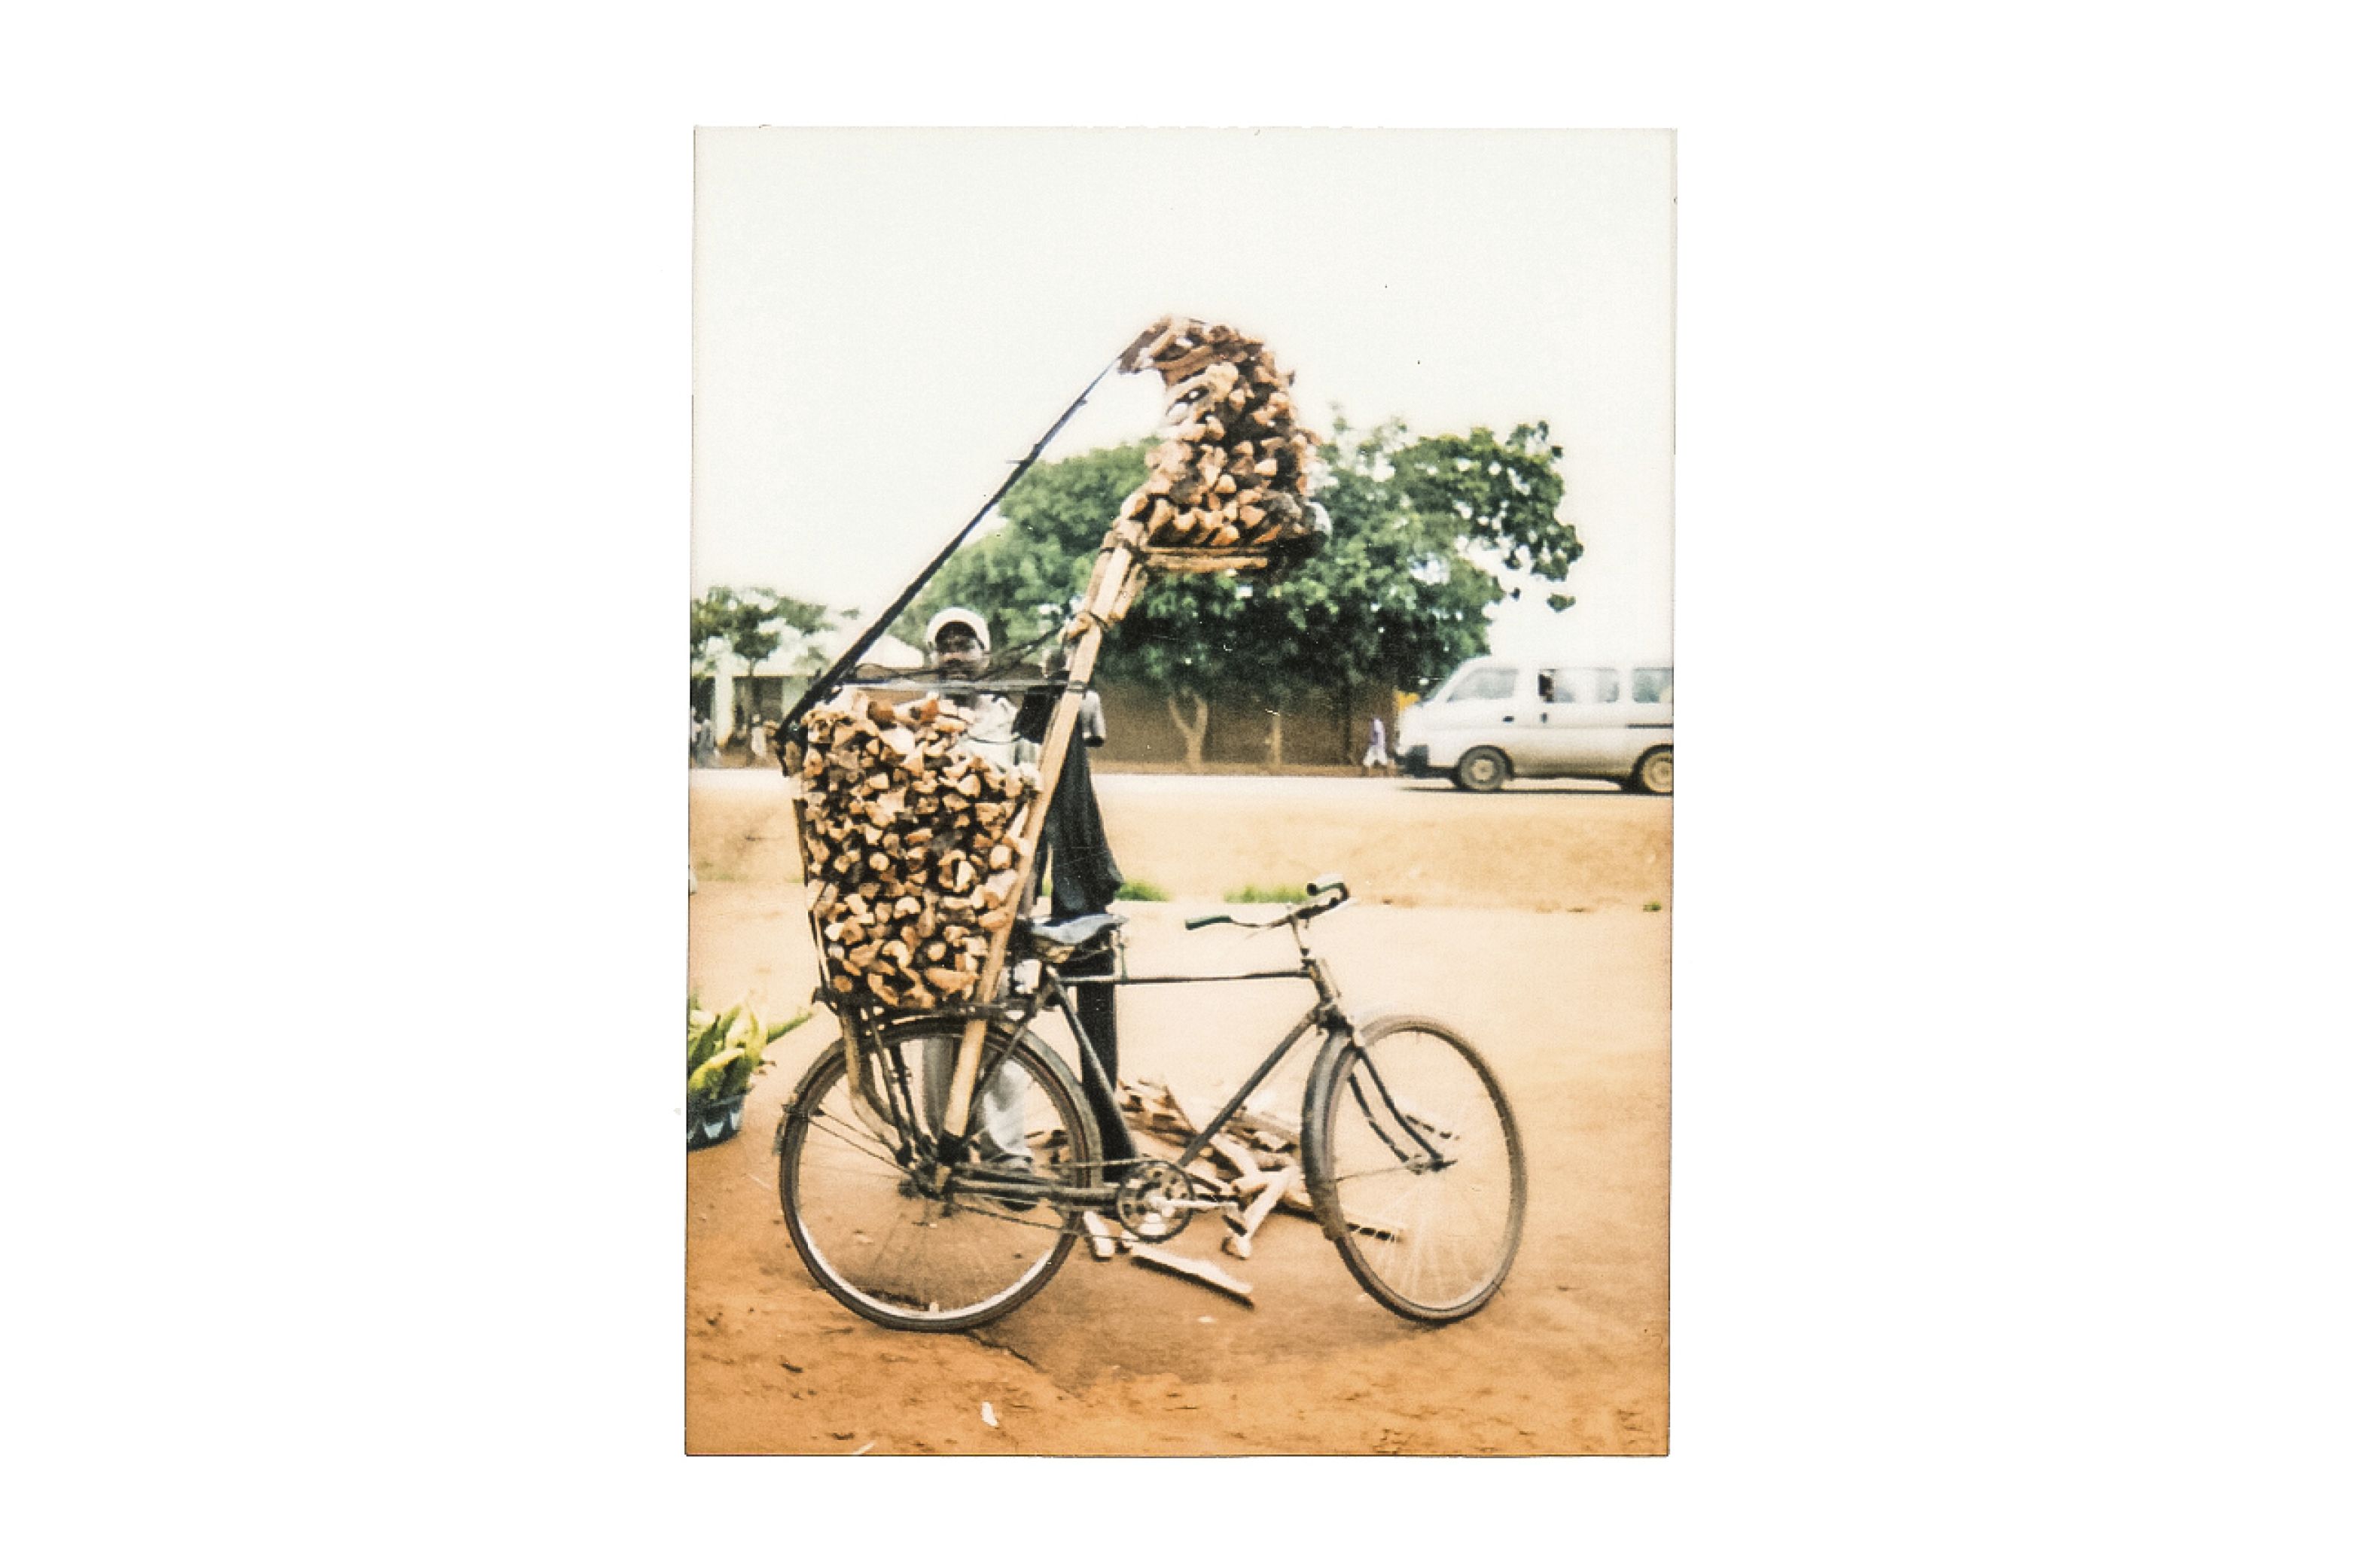 After this man sells firewood to his customers on the outskirts of Lilongwe, he cycles back 100 kilometers to his village.  Image by Nathalie Bertrams. Malawi, 2017.